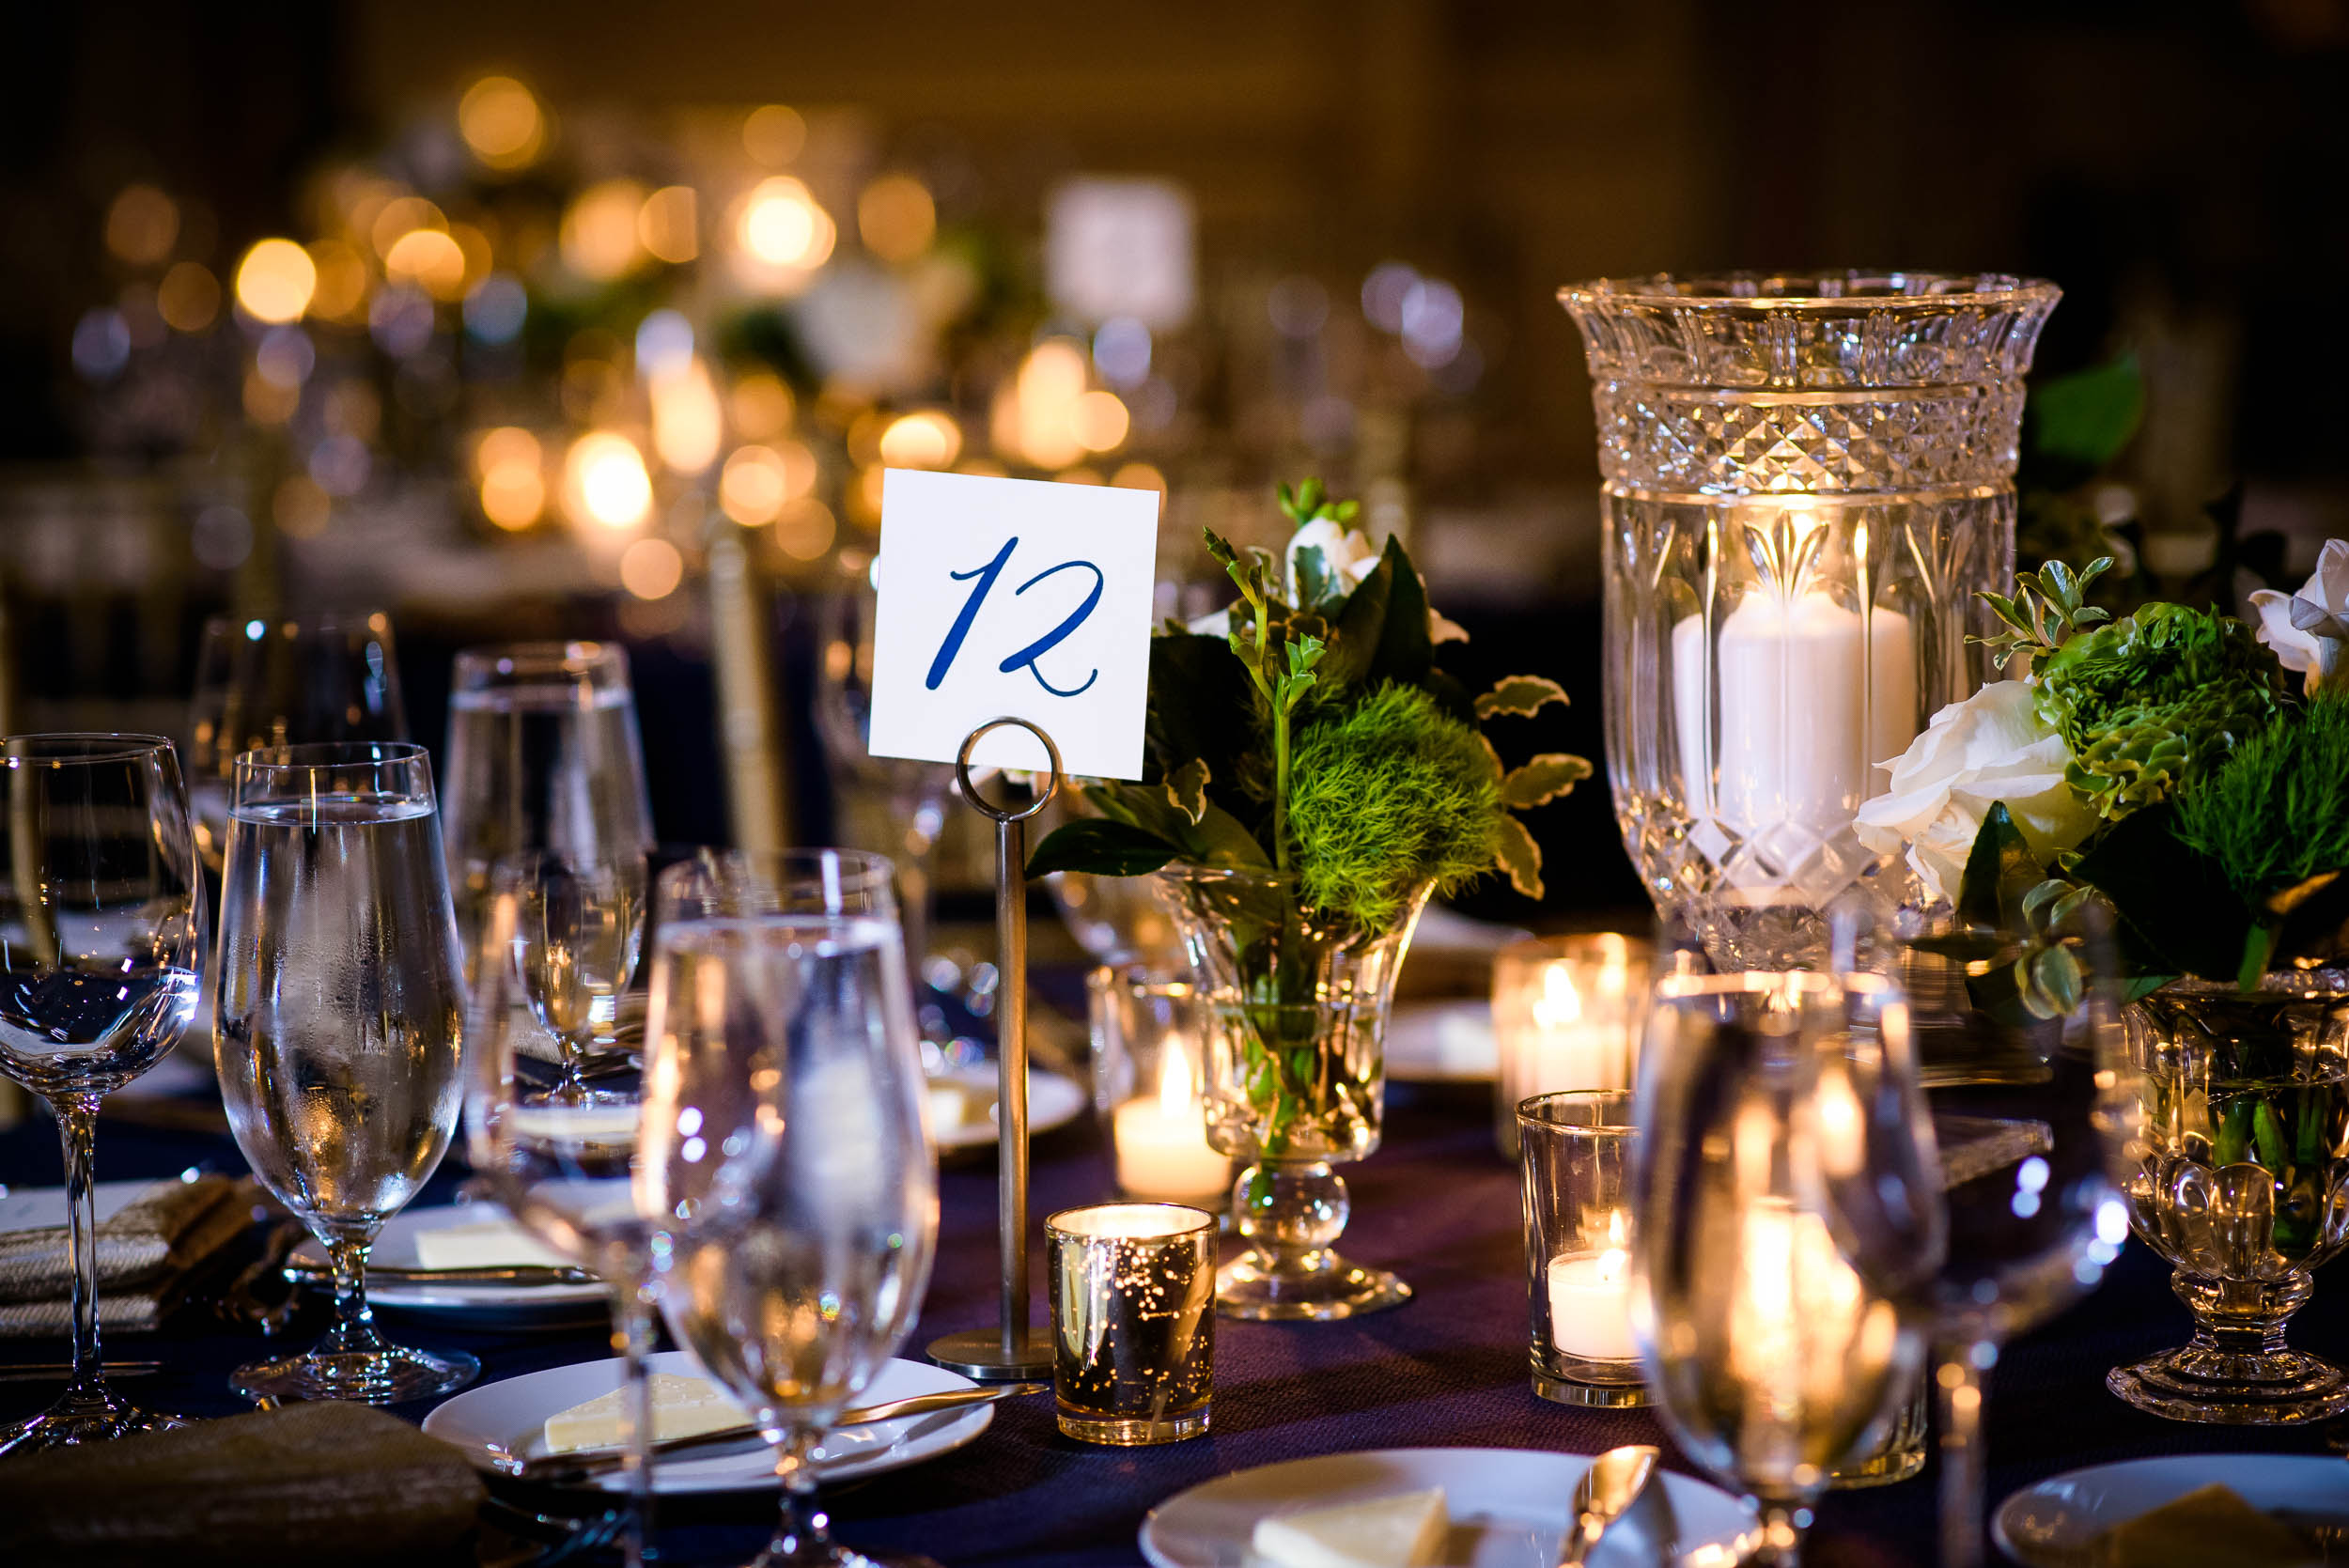 Wedding table decor for luxurious fall wedding at the Chicago Symphony Center captured by J. Brown Photography. See more wedding ideas at jbrownphotography.com!